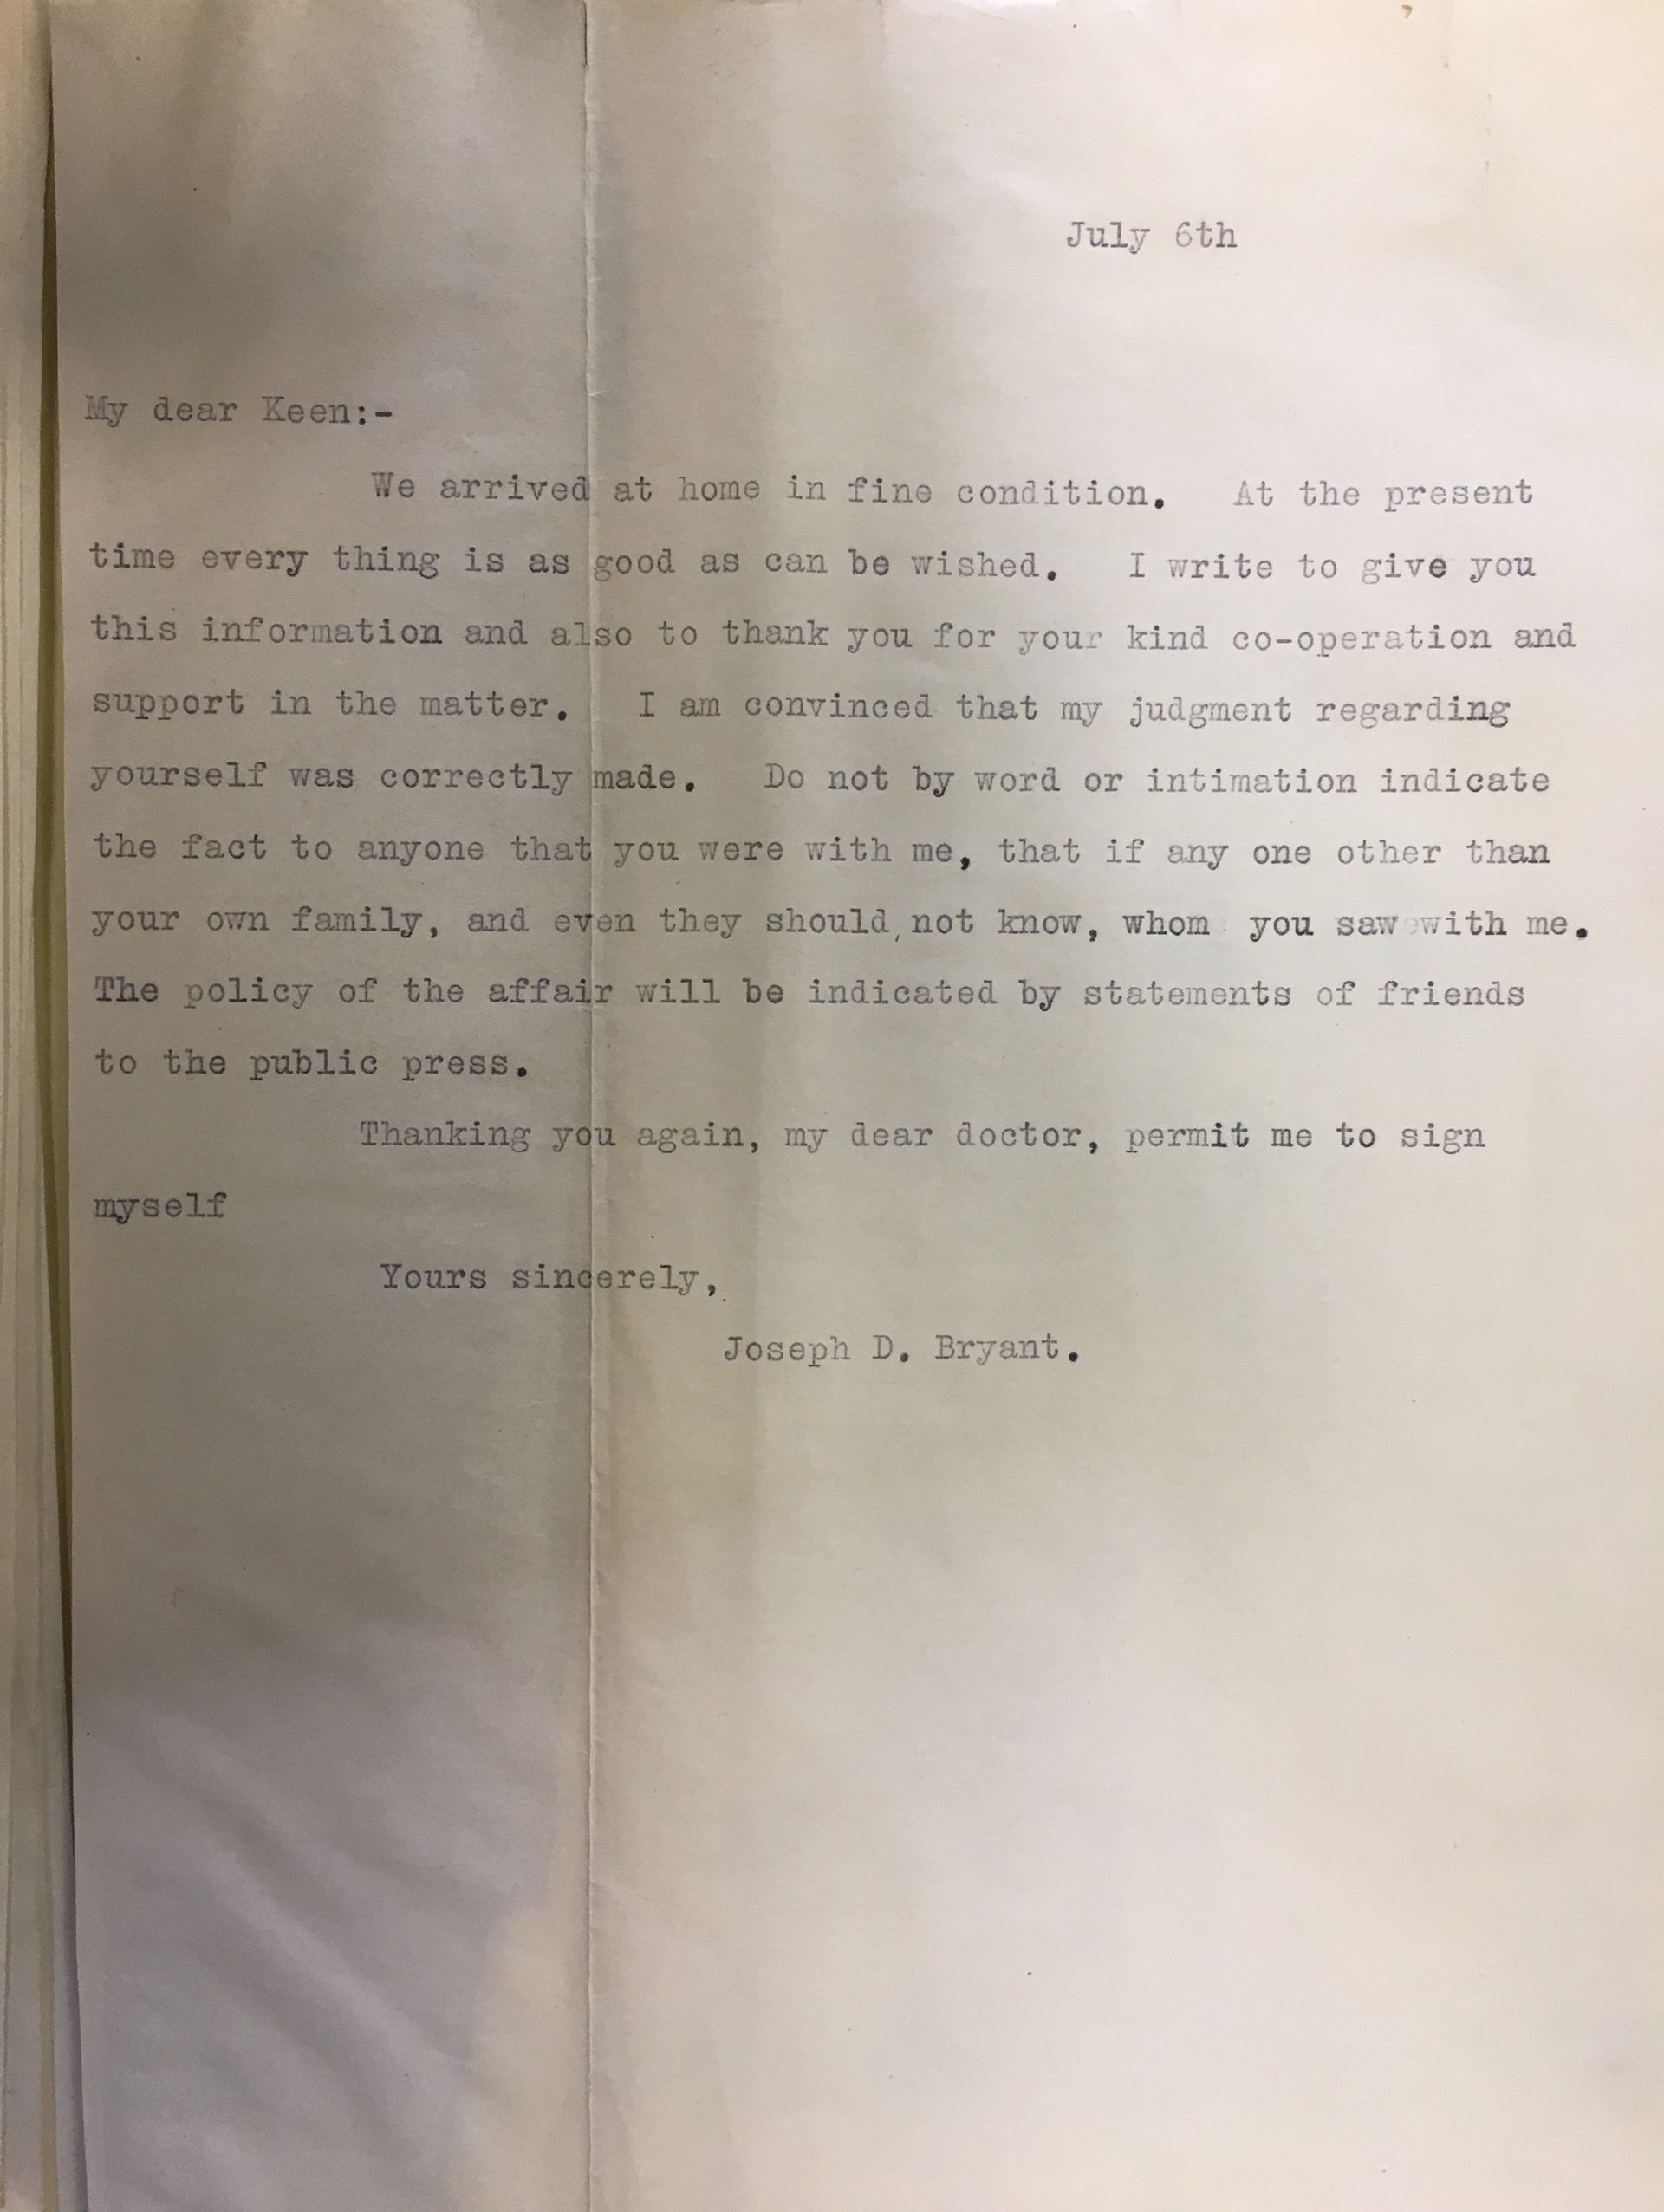 A July 6, 1893, letter from James D. Bryant to William W. Keen praising him for his work in Grover Cleveland's surgery and asking for his discretion